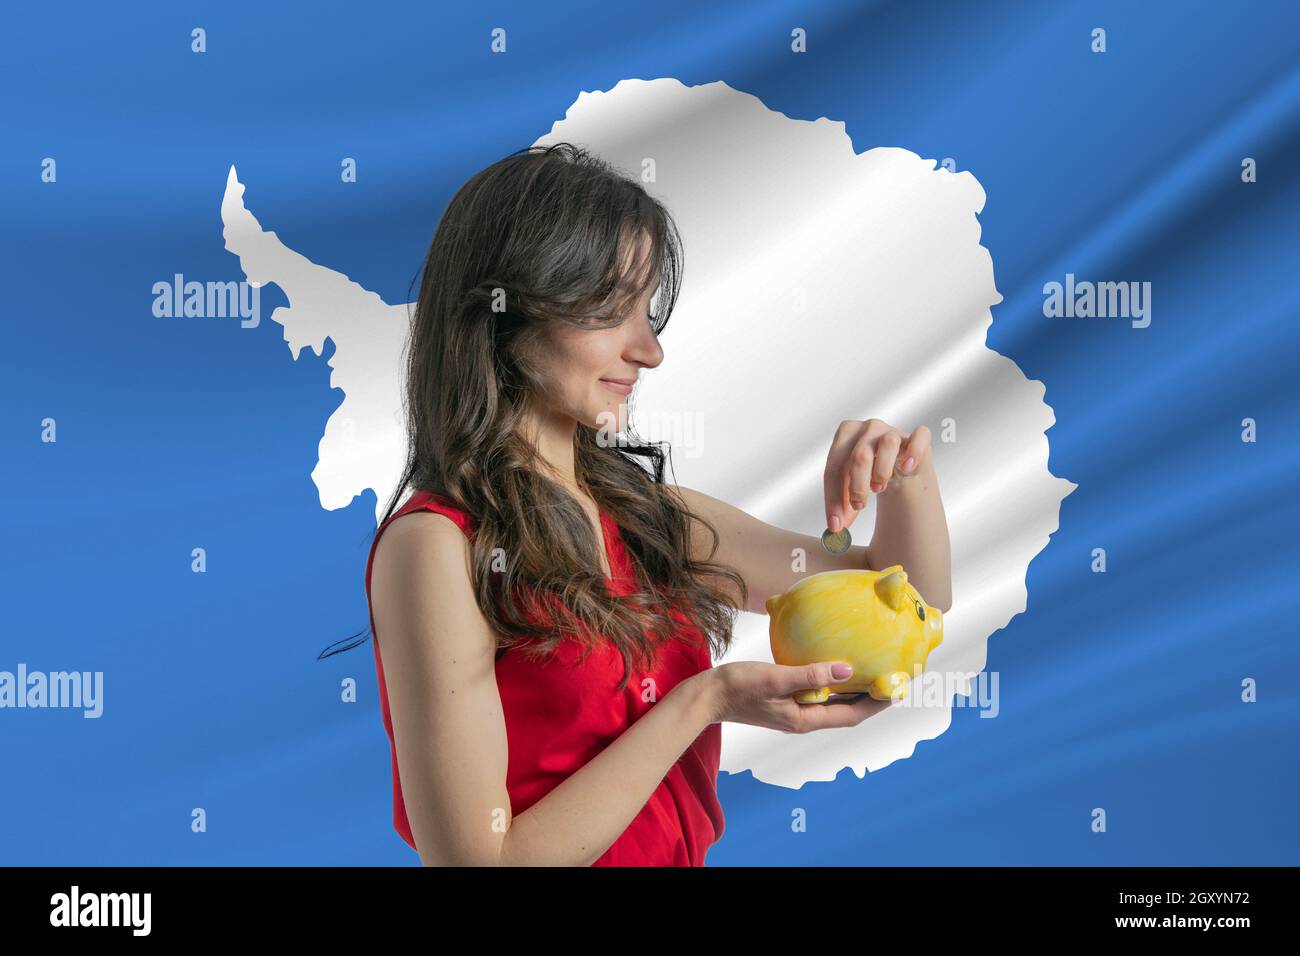 Economy in Antarctica. Accumulating and saving money in Antarctica. Woman putting money coin in piggy bank for saving money and plan finance. Stock Photo